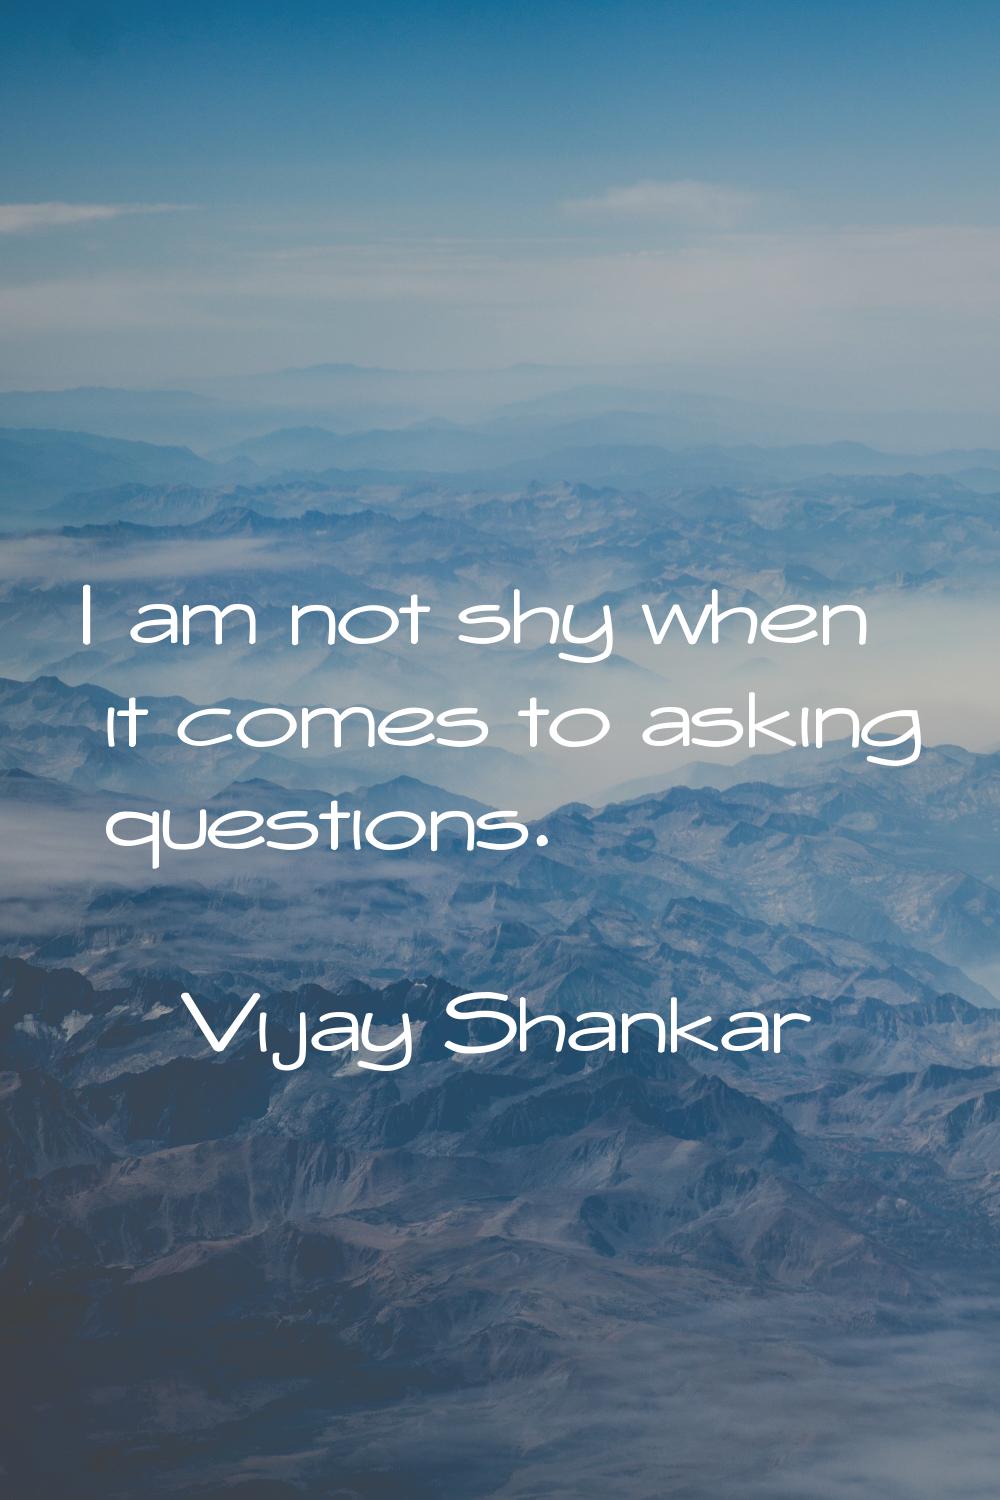 I am not shy when it comes to asking questions.